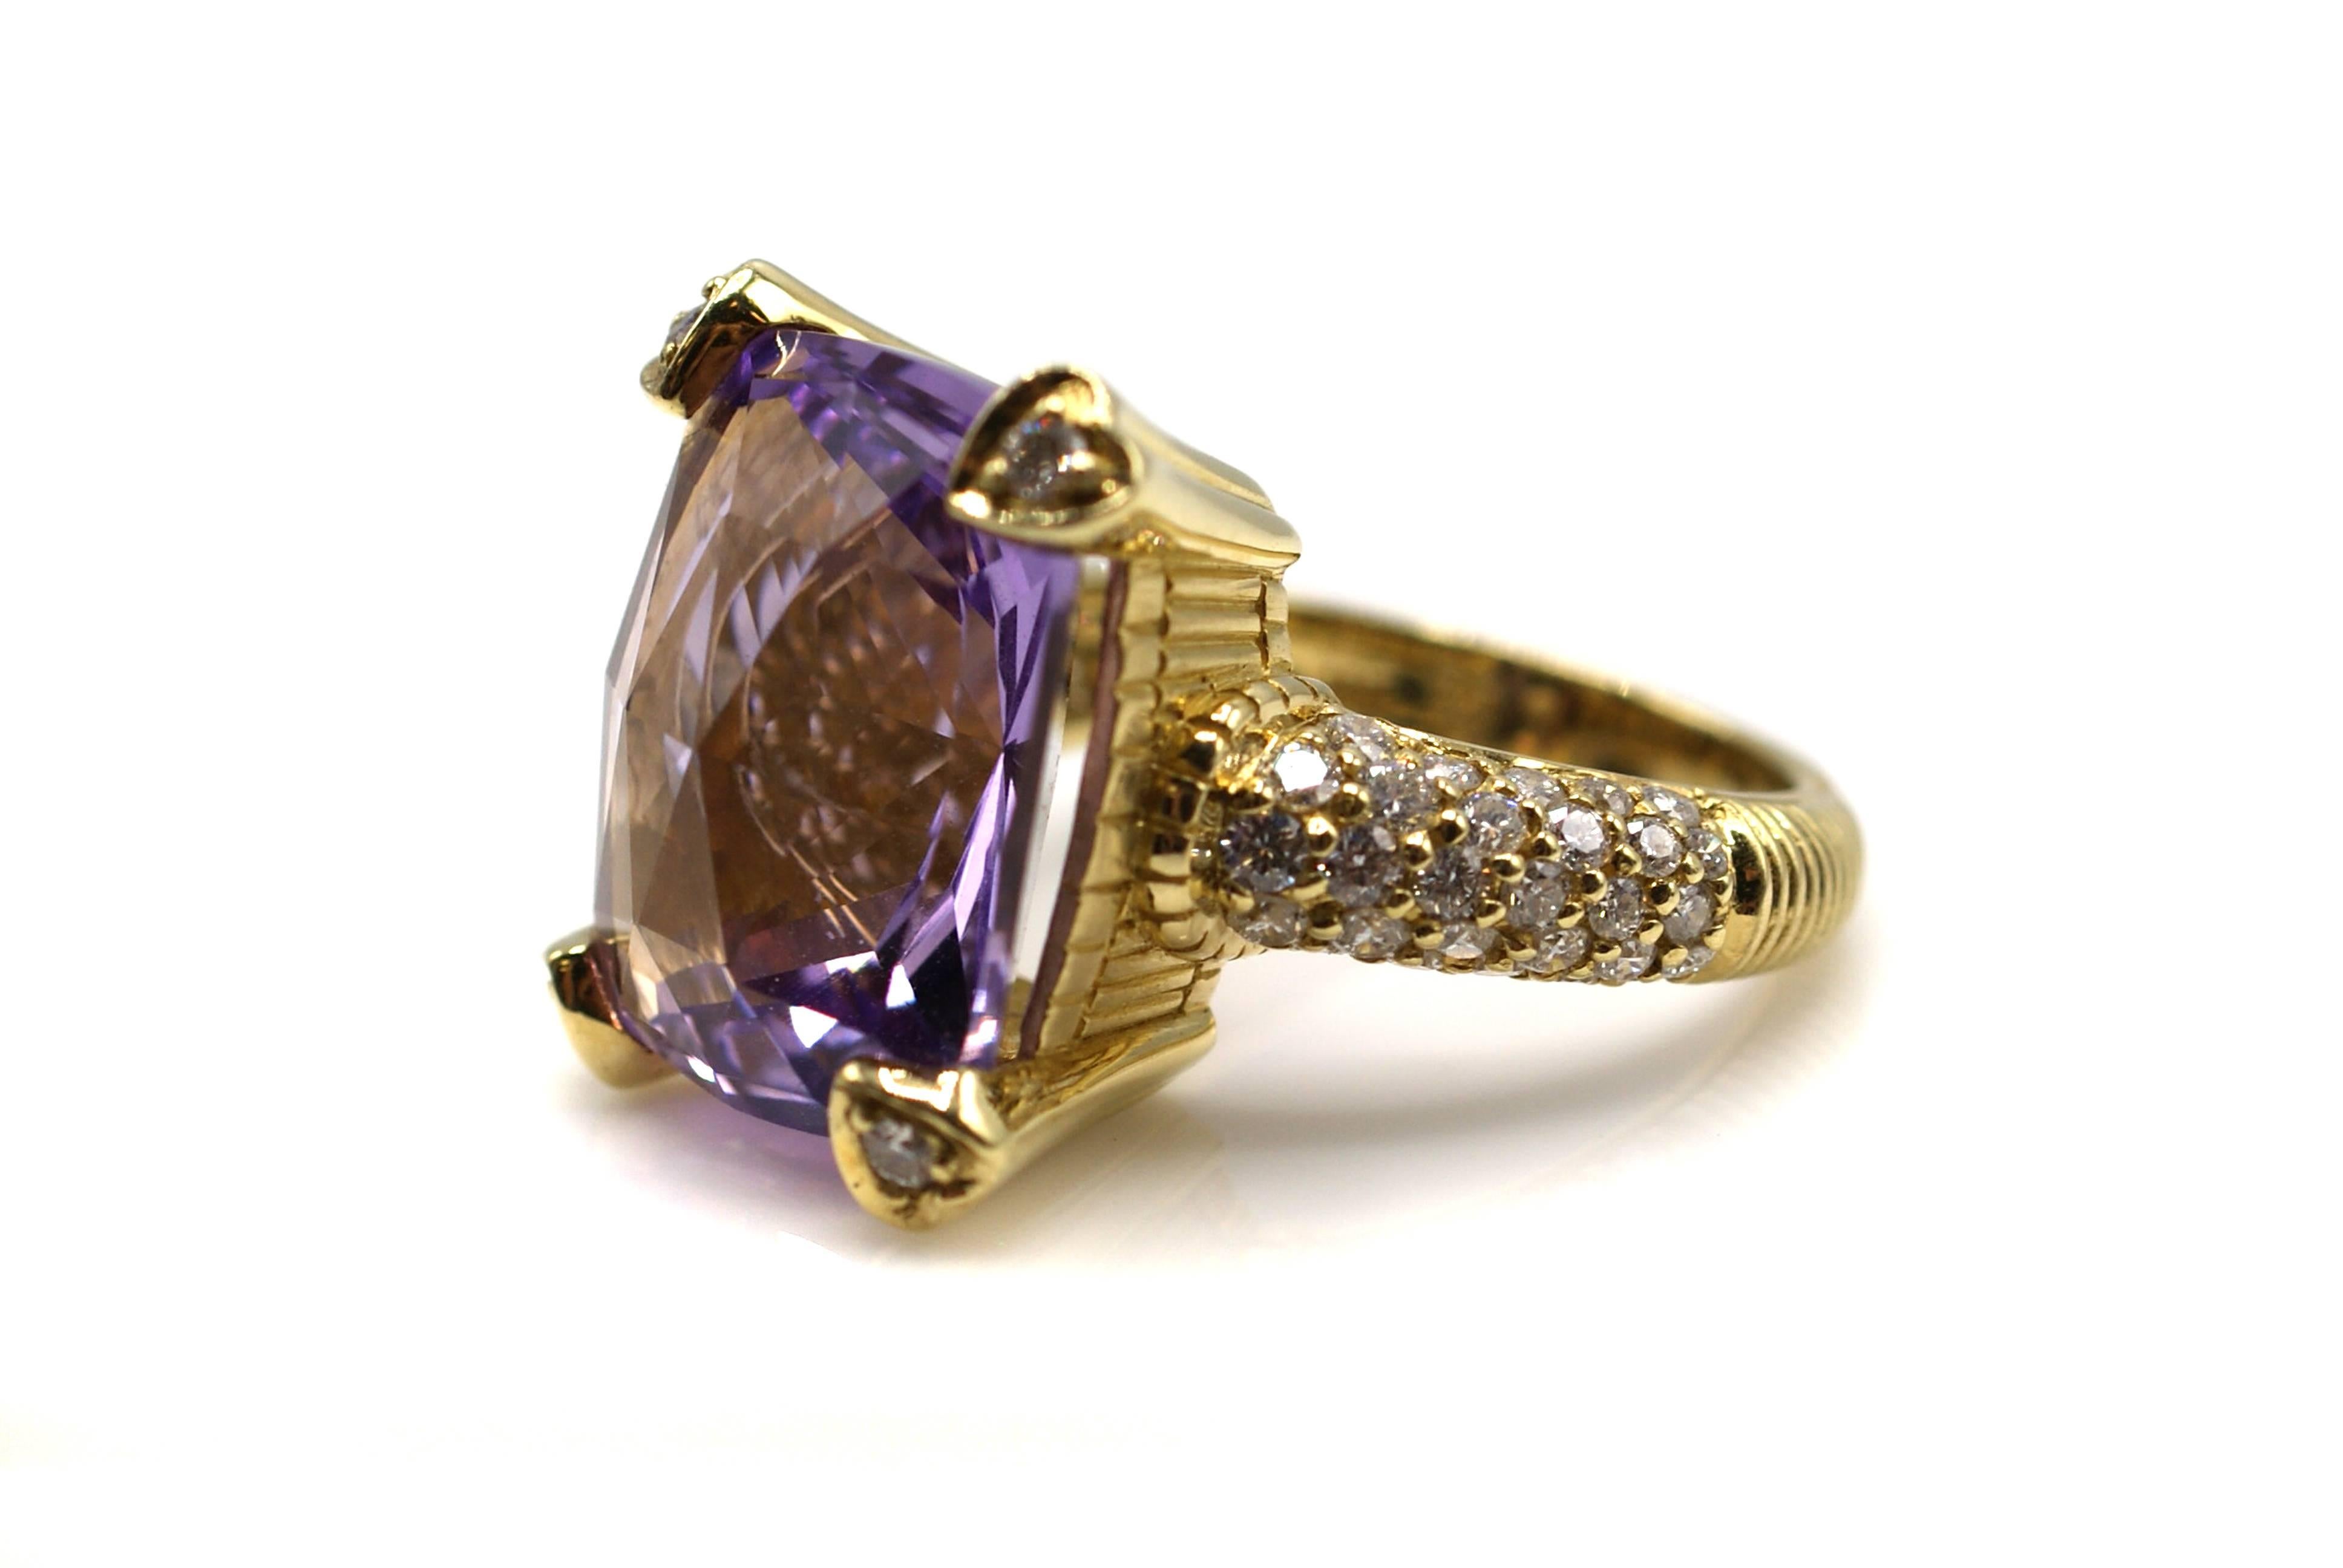 Chic Amethyst diamond ring by Judith Ripka , hand crafted in 18 Karat yellow gold. The bright and lively Amethyst is uniquely faceted both on the top and bottom to bring out maximum life and color. Each of the four corners of the Amethyst is set in